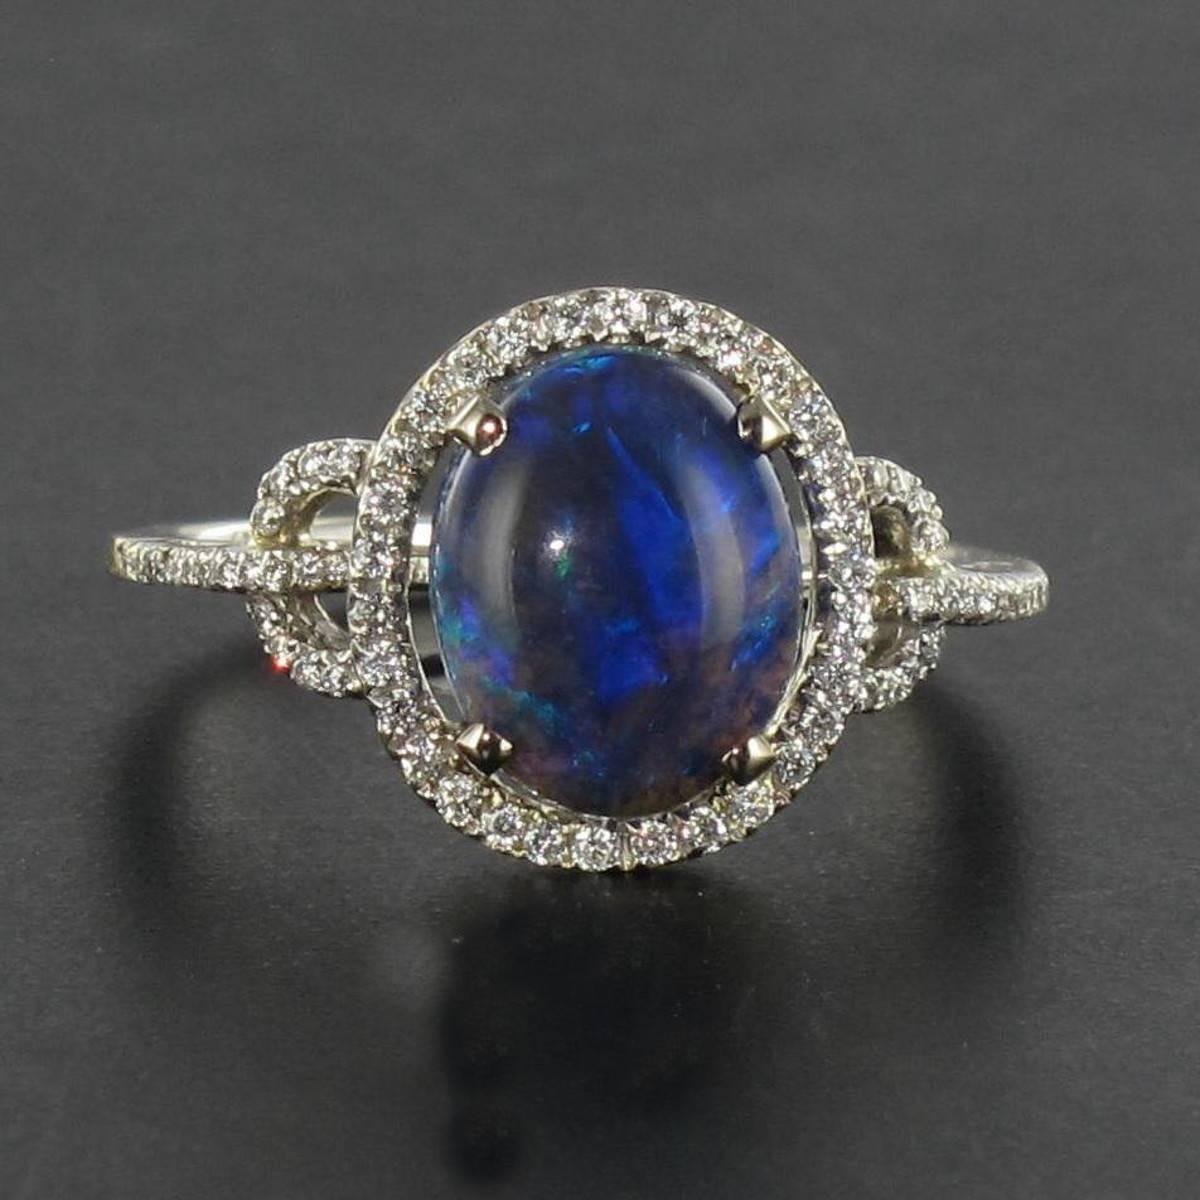 Ring in 18 carat white gold. 

This gorgeous opal ring features a claw set oval shaped black opal cabochon from Australia with a halo of small brilliant cut diamonds. The shoulders of the white gold ring band are formed of semi-circles again set